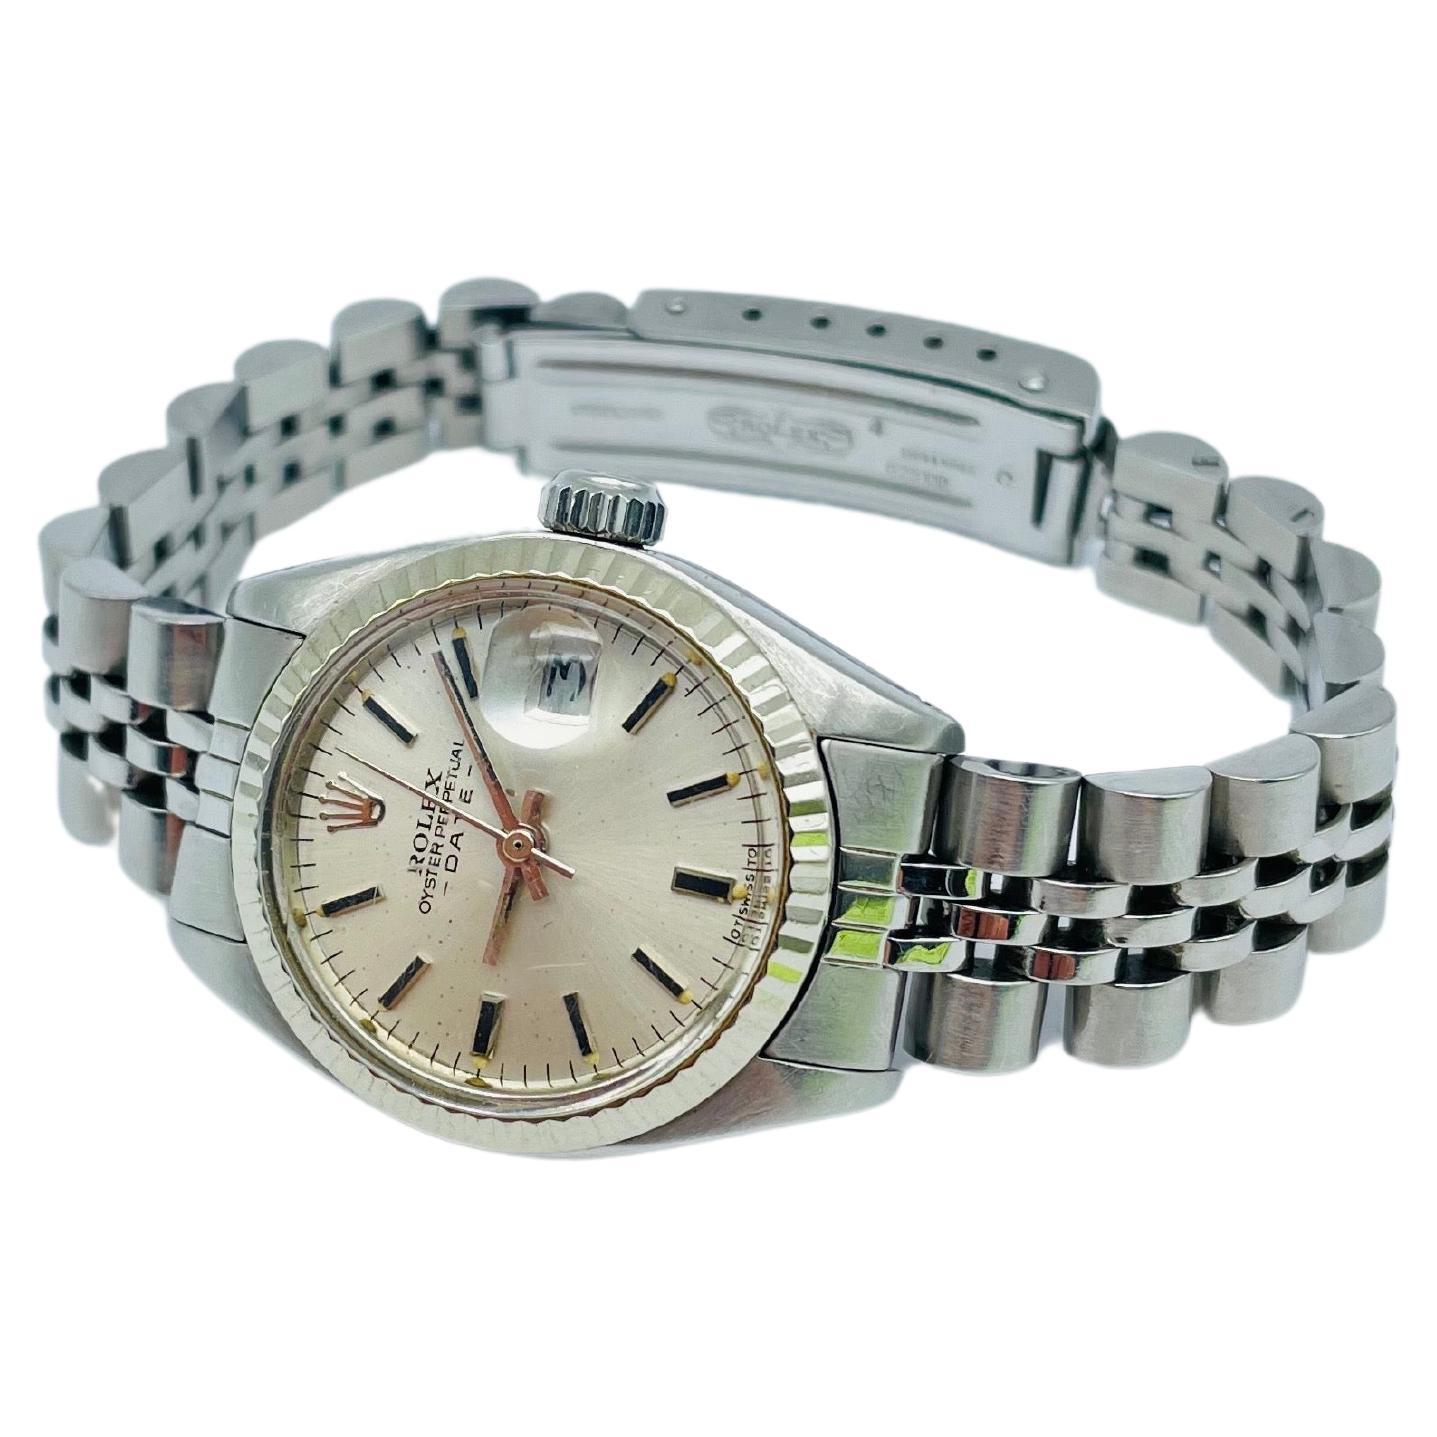 Allow me to paint a picture of elegance and sophistication for you, with the stunning ROLEX Oyster Perpetual Date Lady watch, reference 6917, crafted in 1977. The case is crafted from premium stainless steel, lending a sleek and modern touch to the